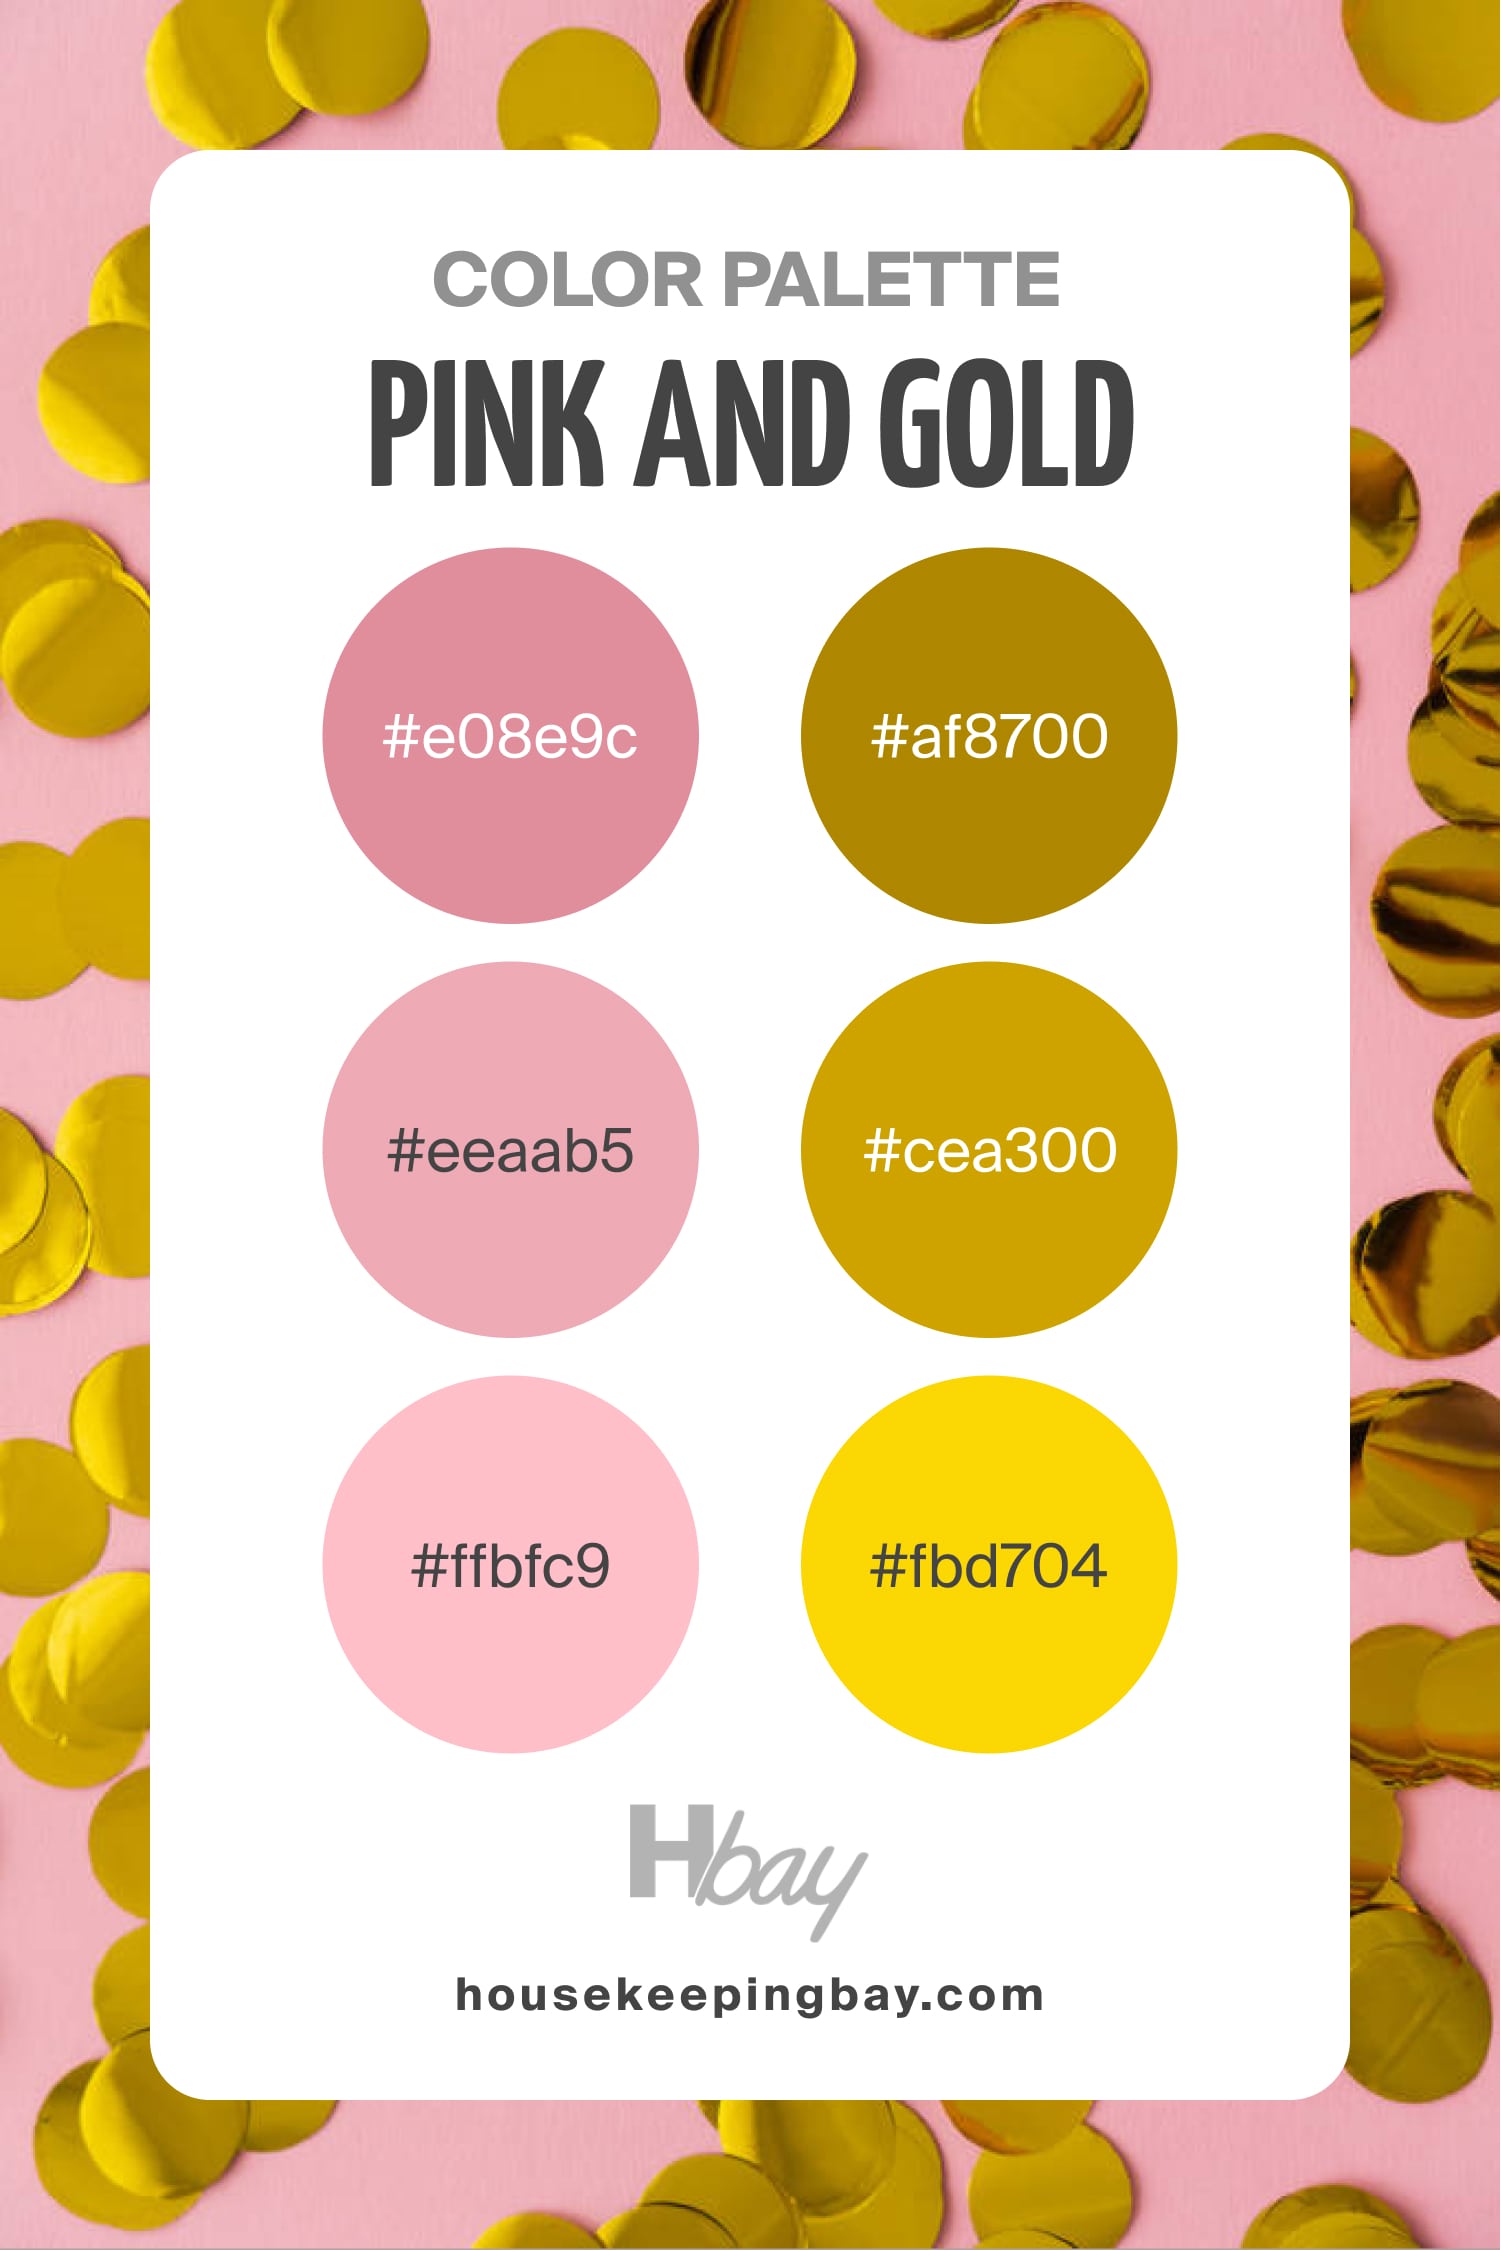 Pink and Gold Color Palette